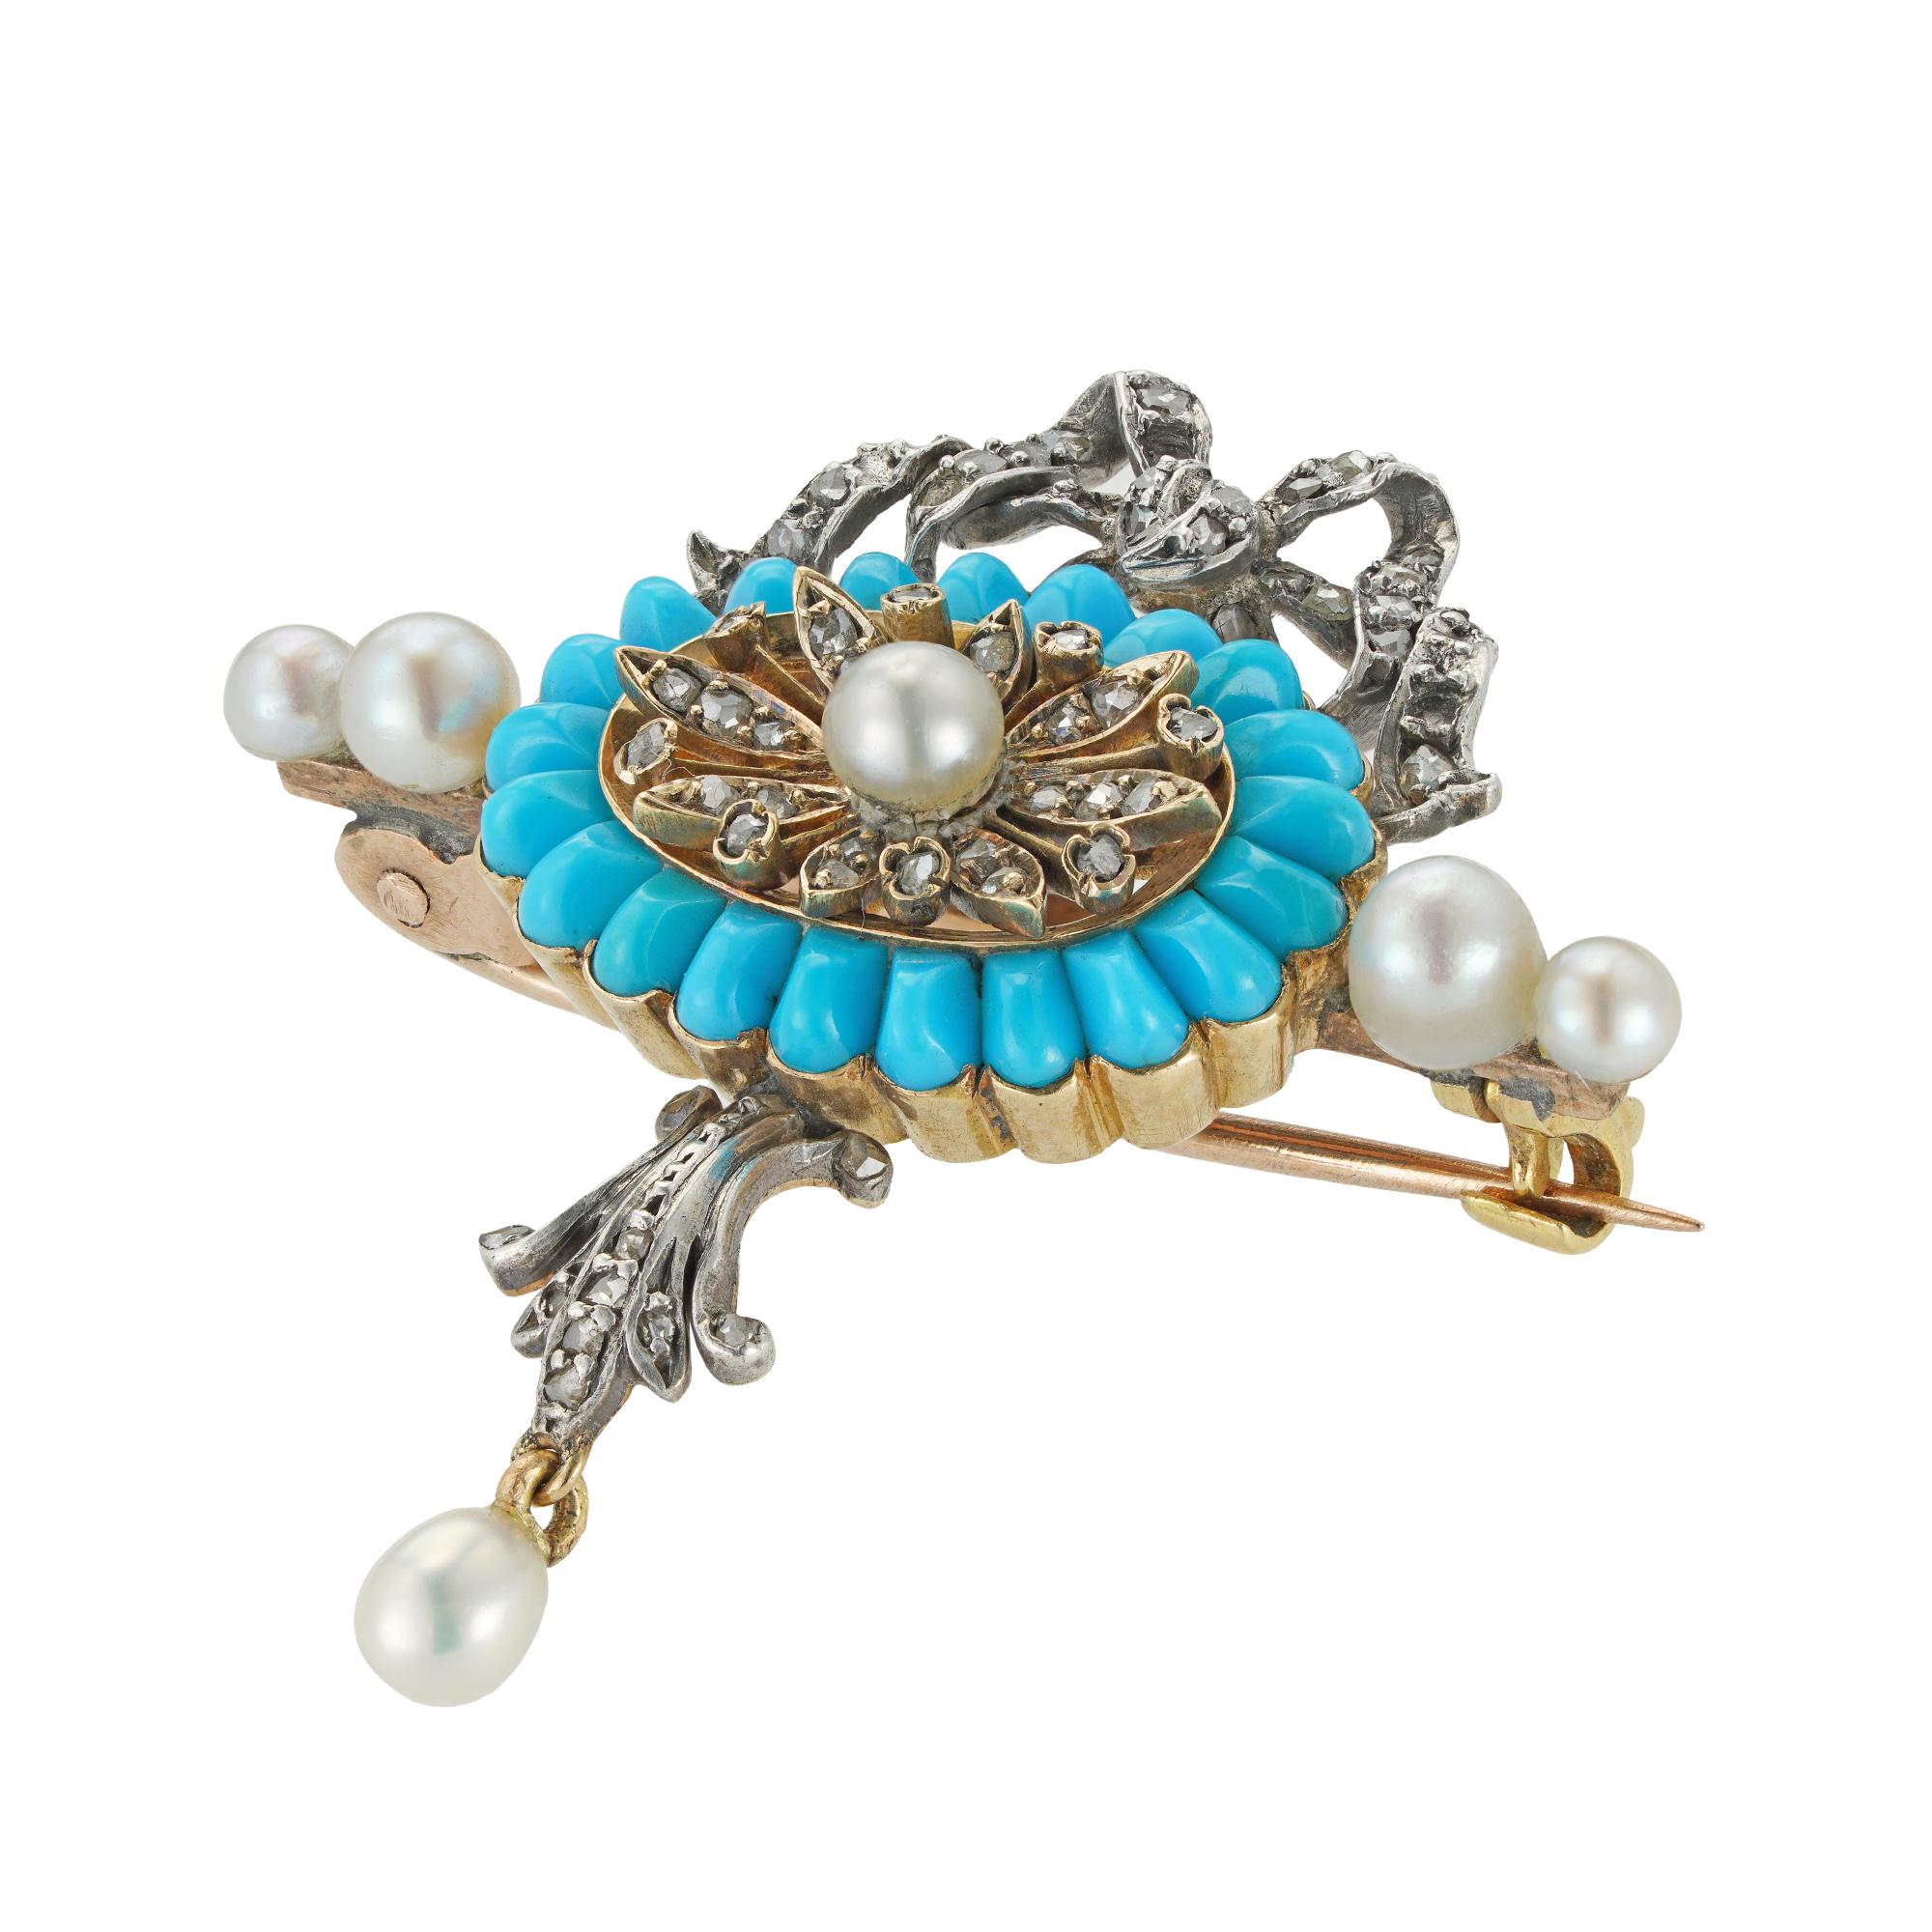 An Edwardian turquoise, pearl and diamond brooch, to the centre with an oval diamond-set flower set with a pearl, surrounded by twenty one cabochon turquoises, suspending an articulated pearl drop and surmounted by a diamond-set bow, mounted in